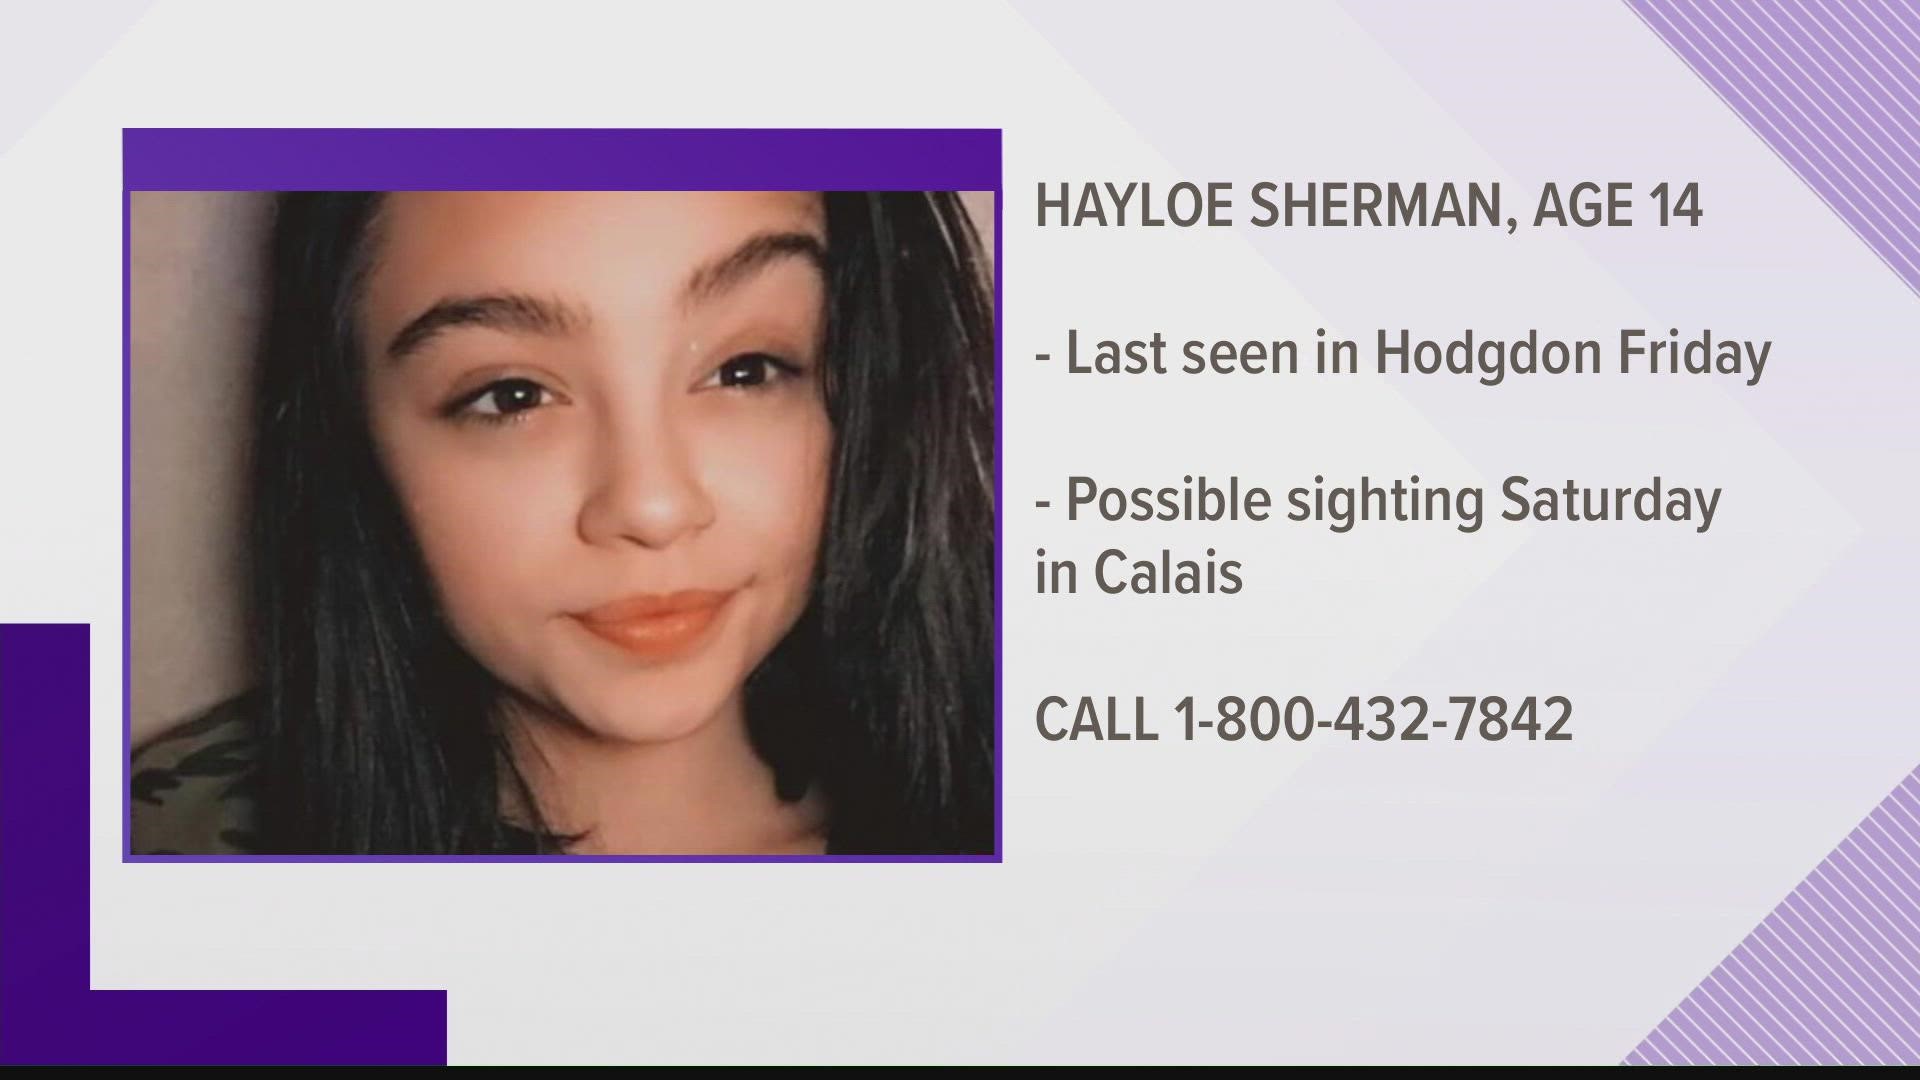 Police said Hayloe Sherman, 14, of Hodgdon, was believed to have been last seen in the Calais area on Saturday. Anyone with information is asked to call the police.